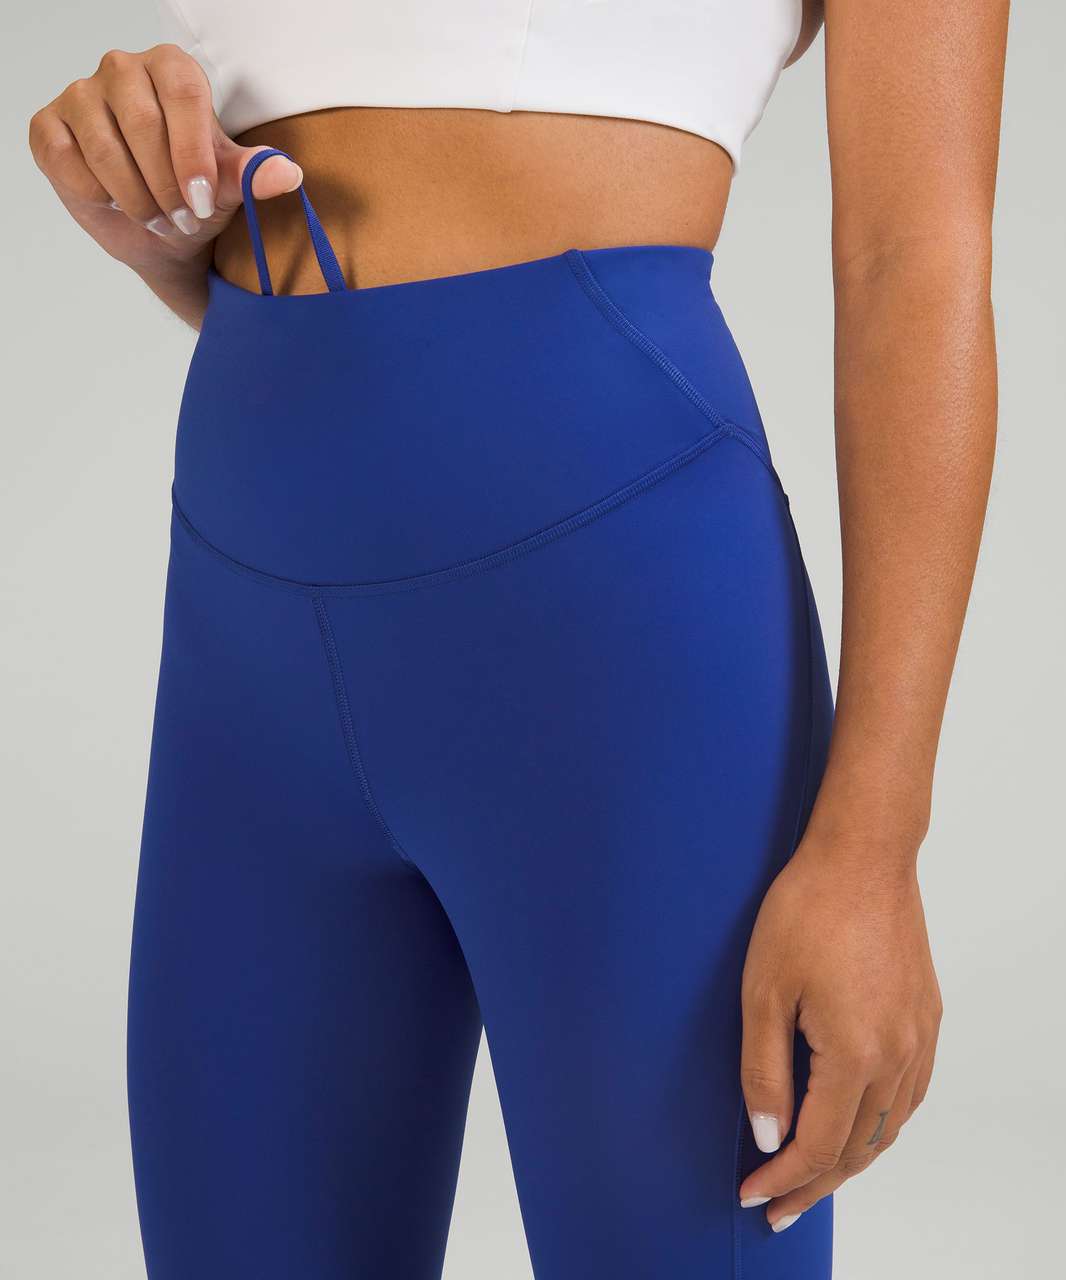 Lululemon Base Pace High-Rise Running Tight 25" - Psychic